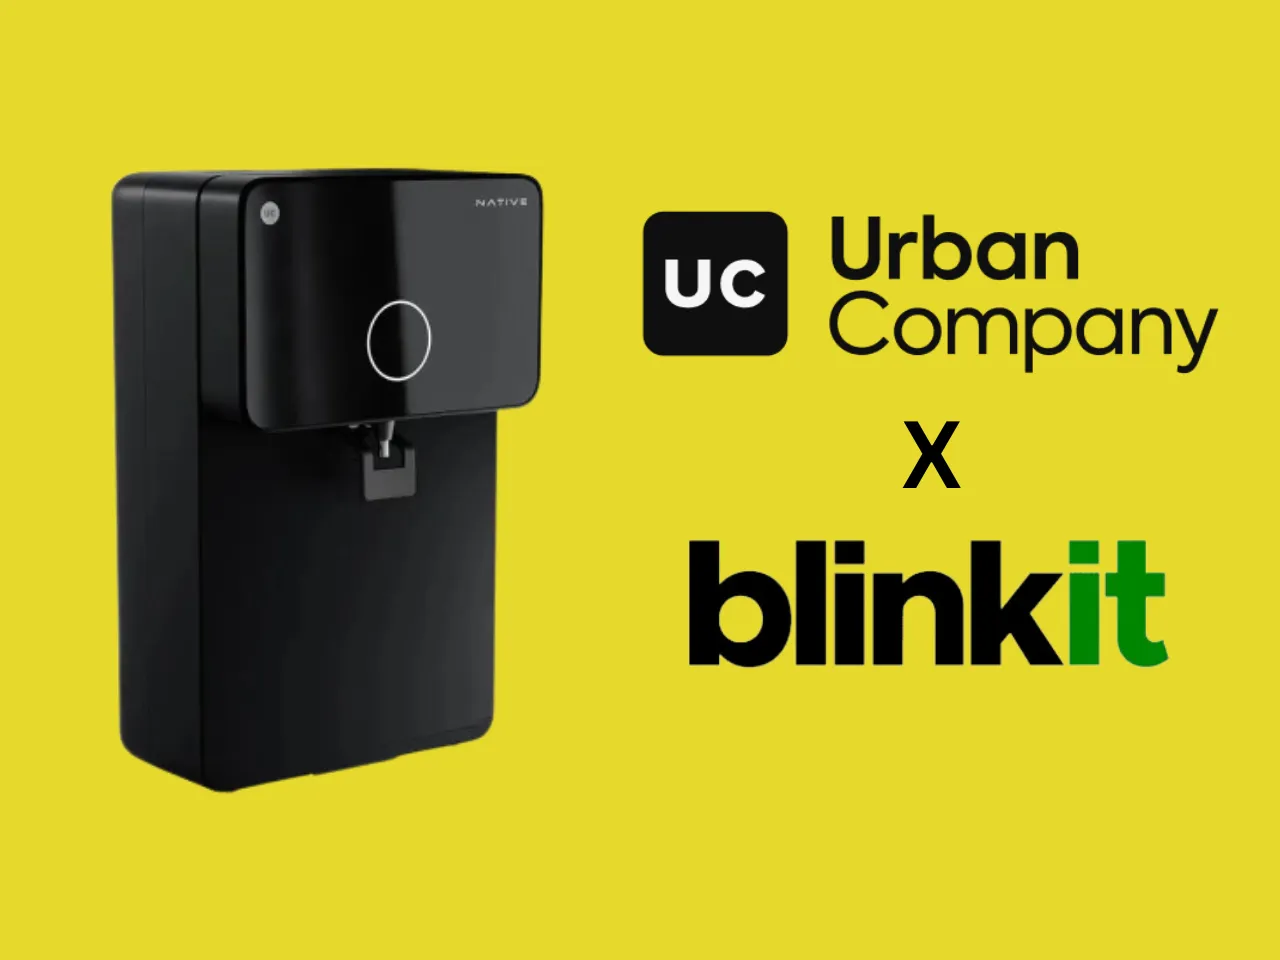 Urban Company partners with Blinkit to deliver Native RO Water Purifiers in 30 minutes